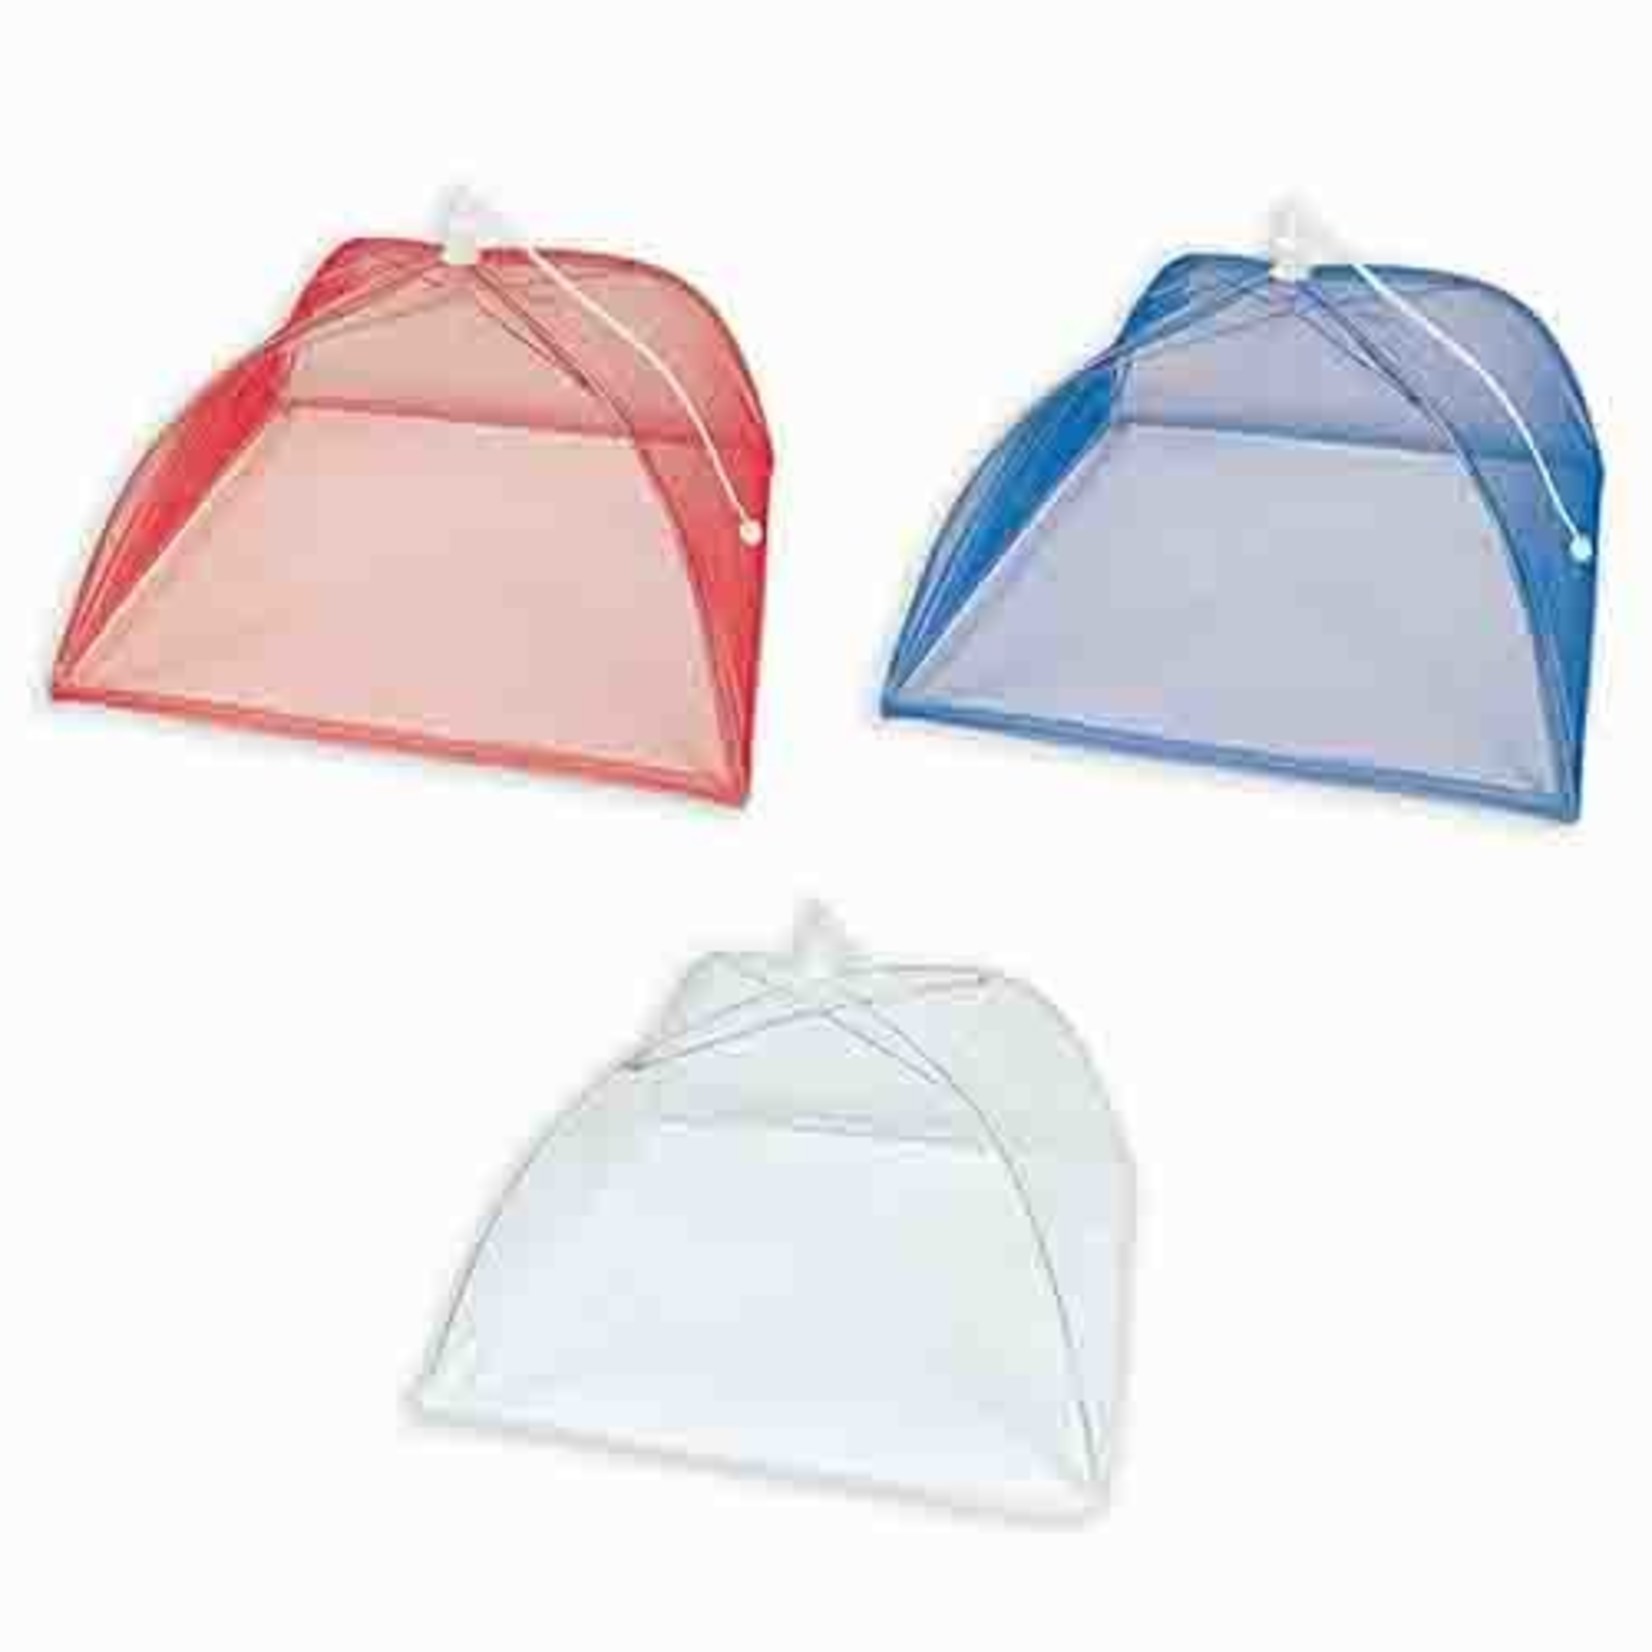 Amscan Red, White & Blue Food Covers - 3ct.